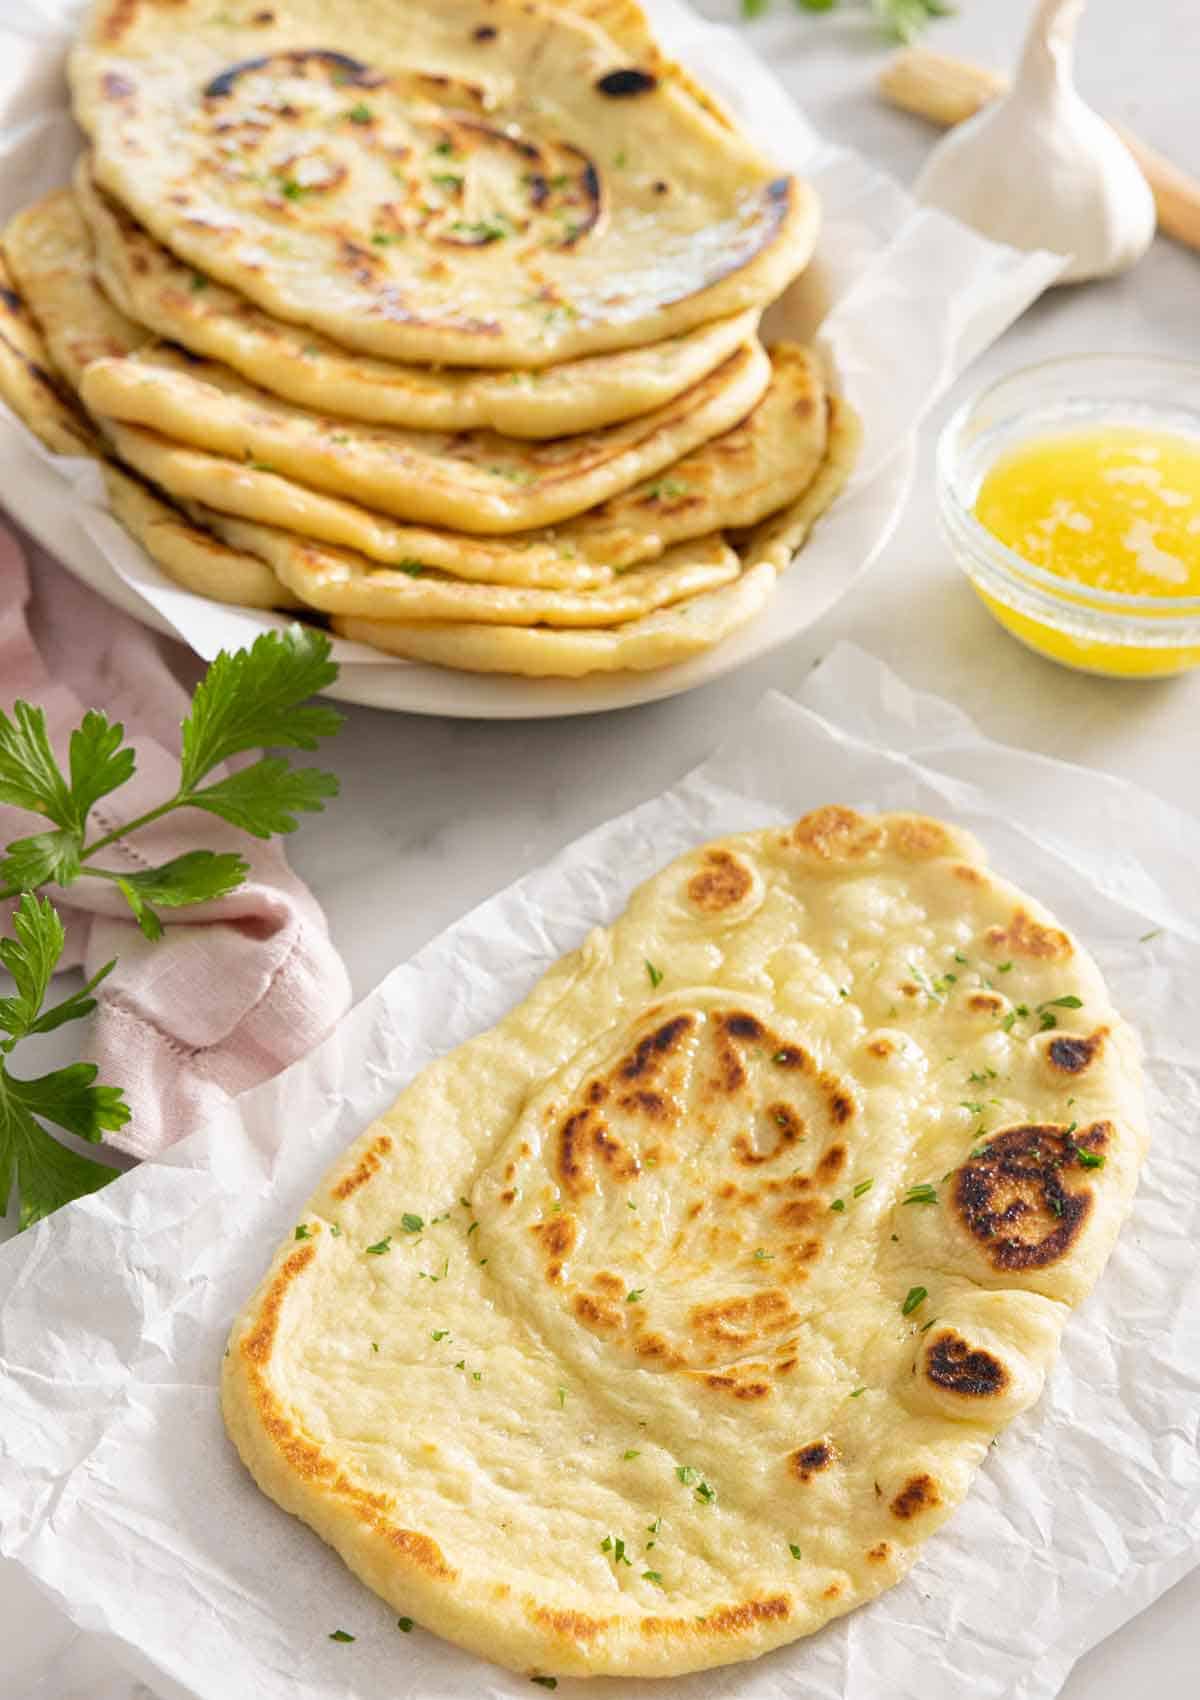 A naan bread on parchment in front of a stack of naans.